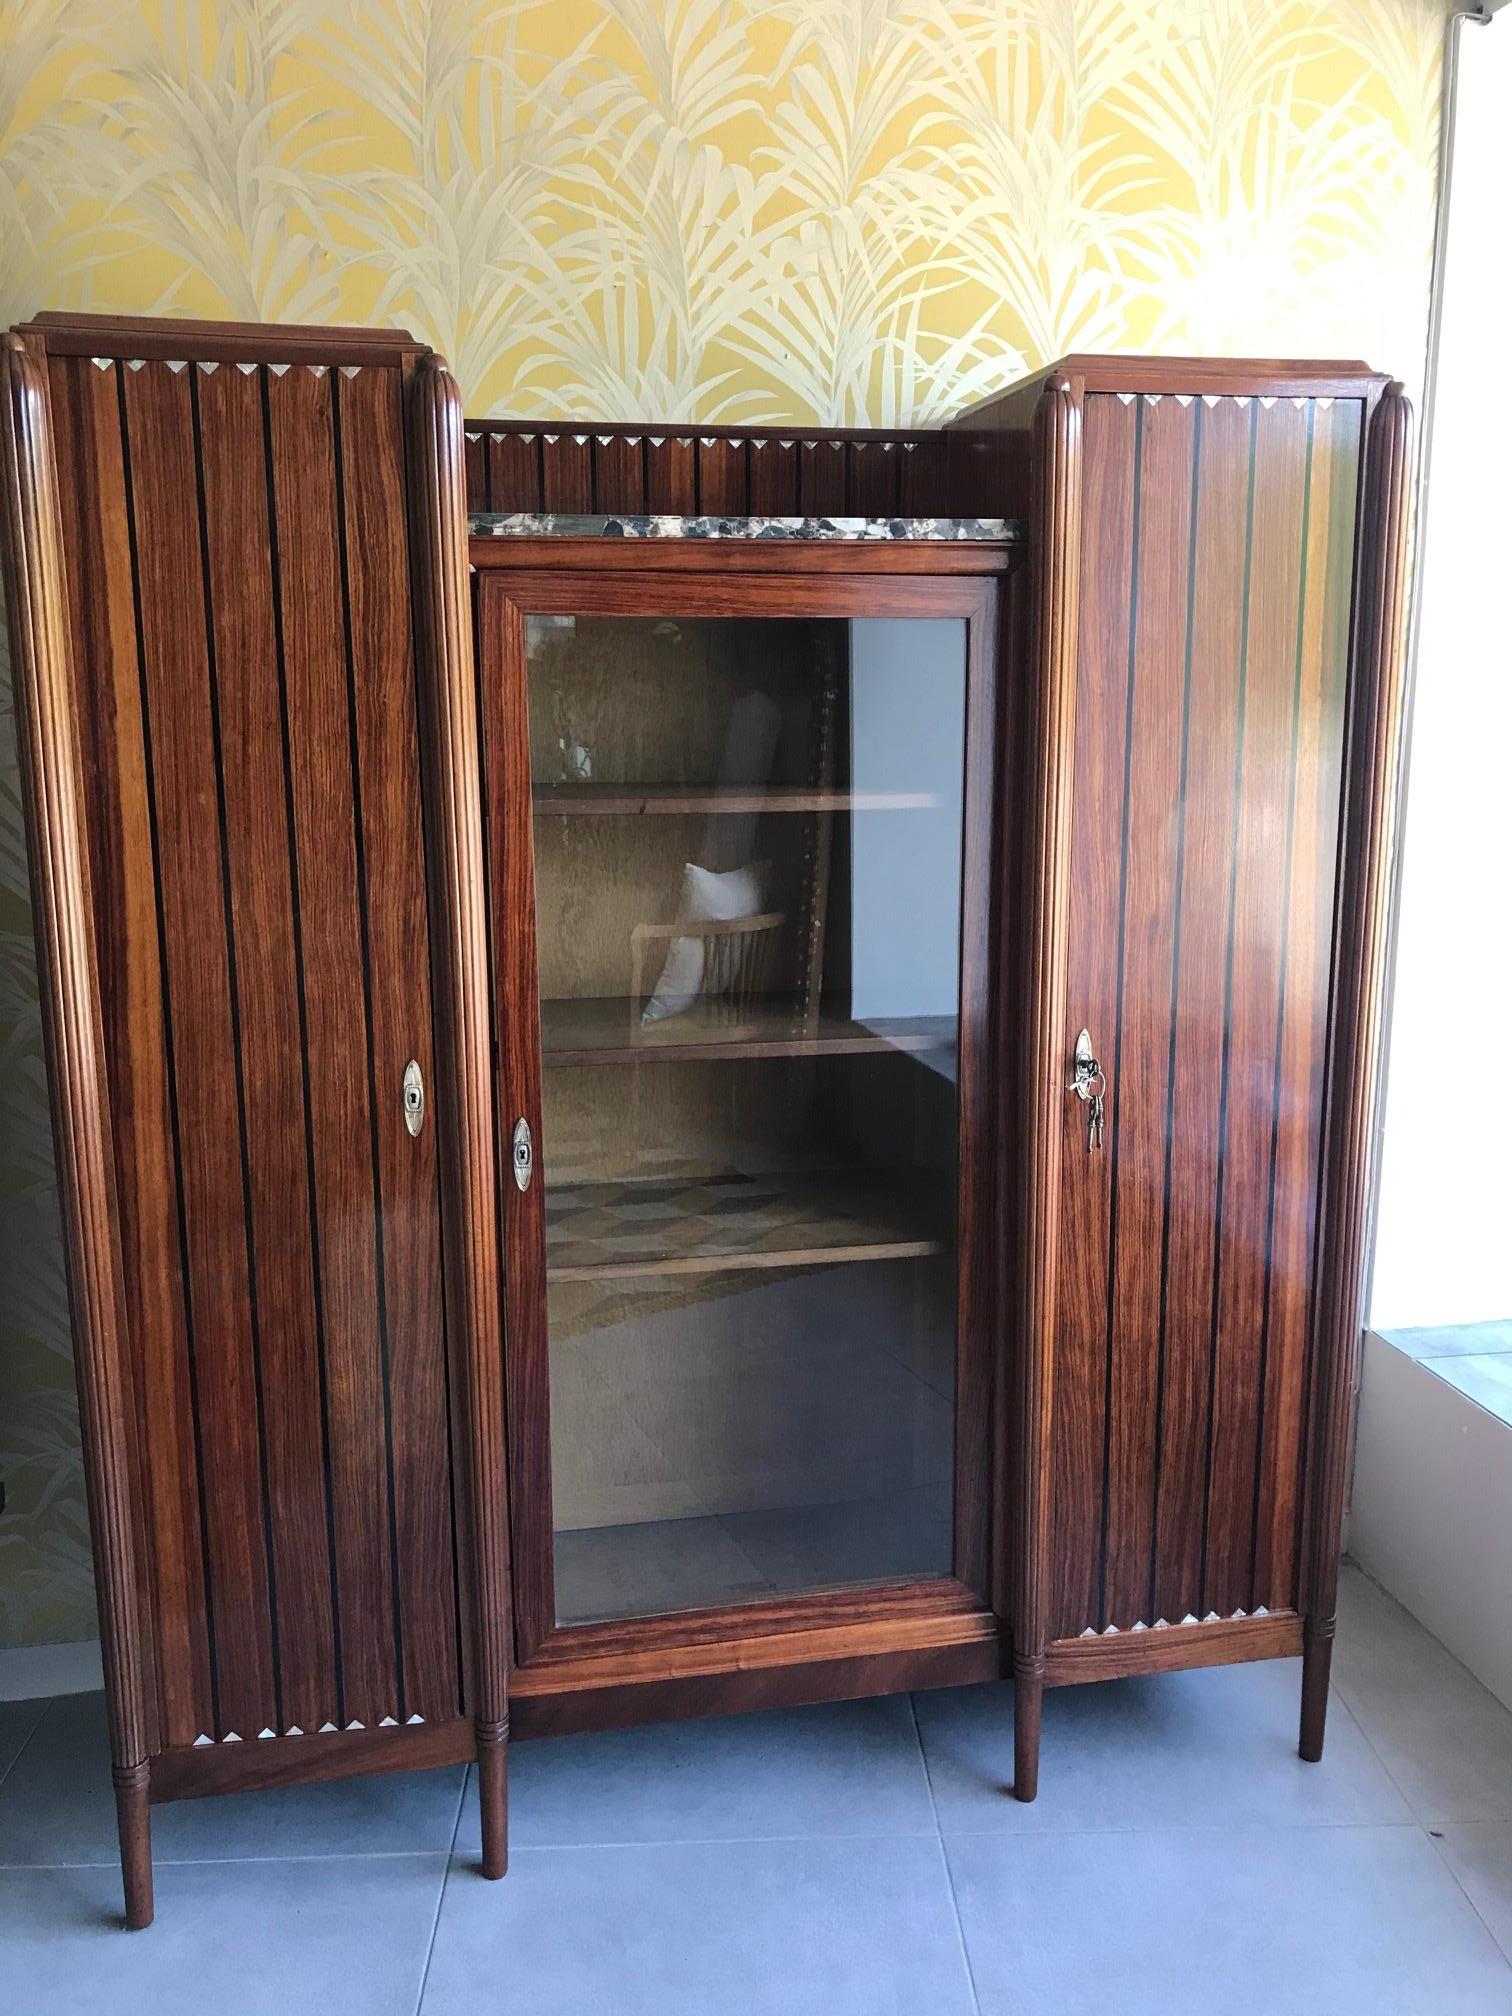 Beautiful and rare 20th century French Art Deco Macassar and mother of pearl inlaid vitrine from the 1930s.
Entirely removable and modular shelves. Two shelves parts and one vitrine part in the center. Removable marble on the top, ideal to show a